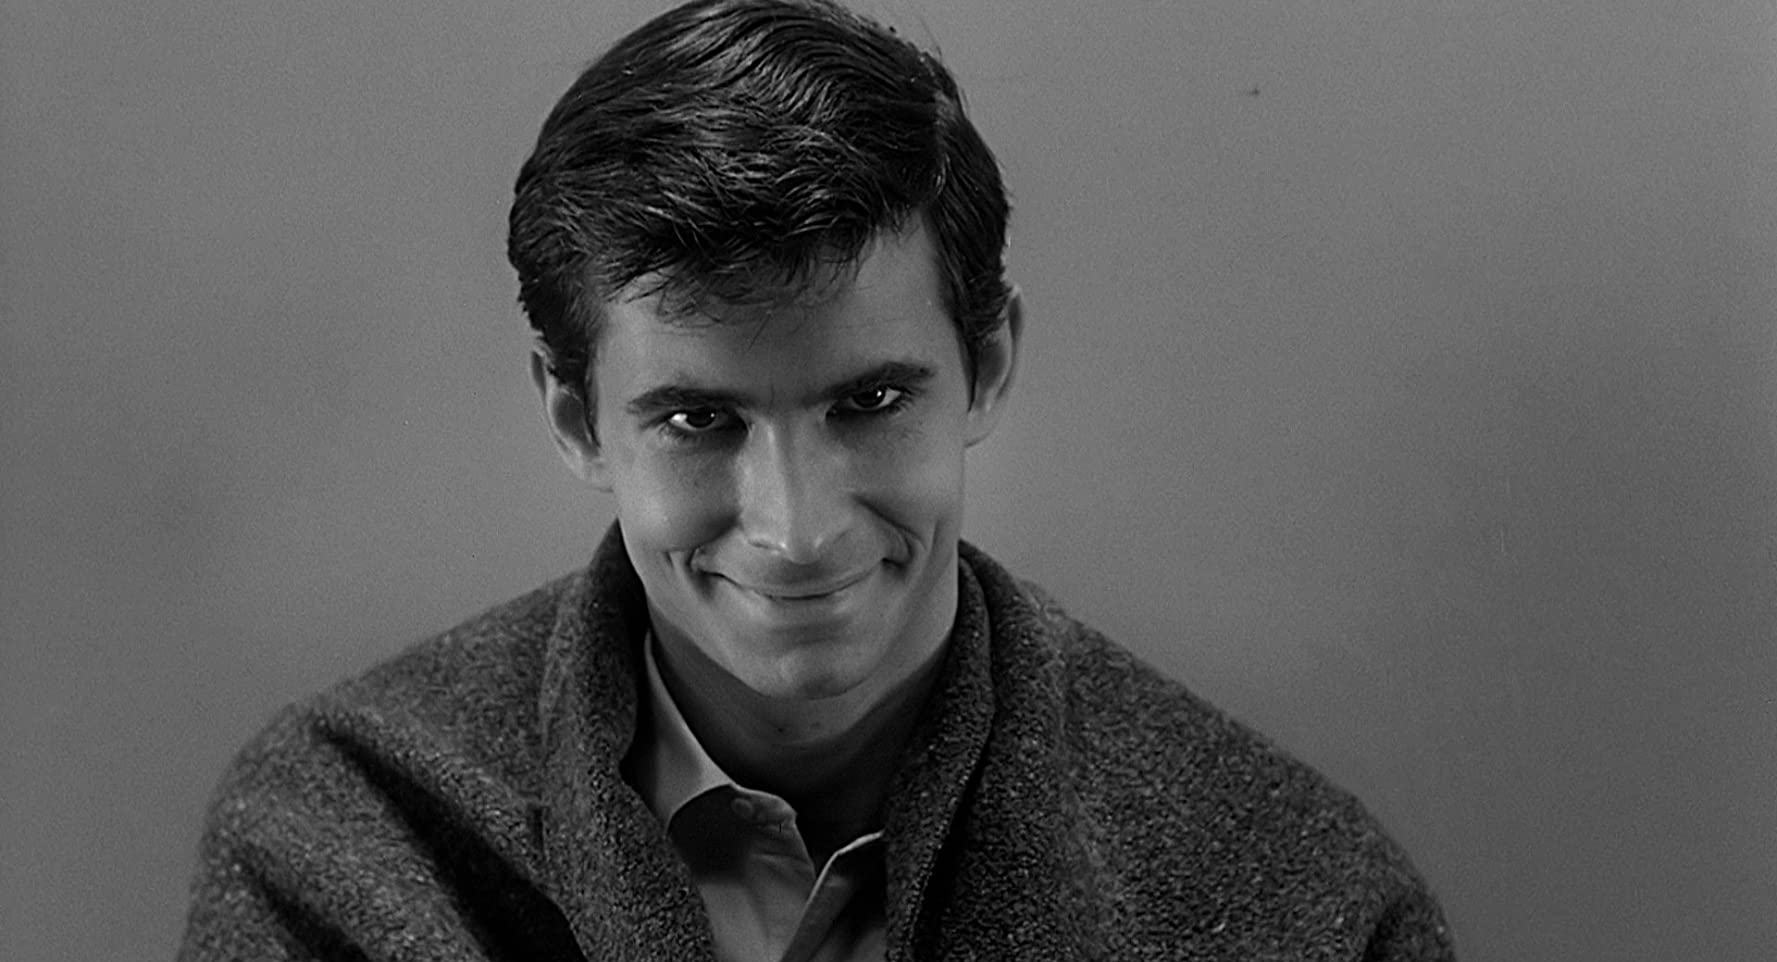 "Intergenerational Trauma:" Norman Bates (Anthony Perkins) stares into the camera with a menacing smile.